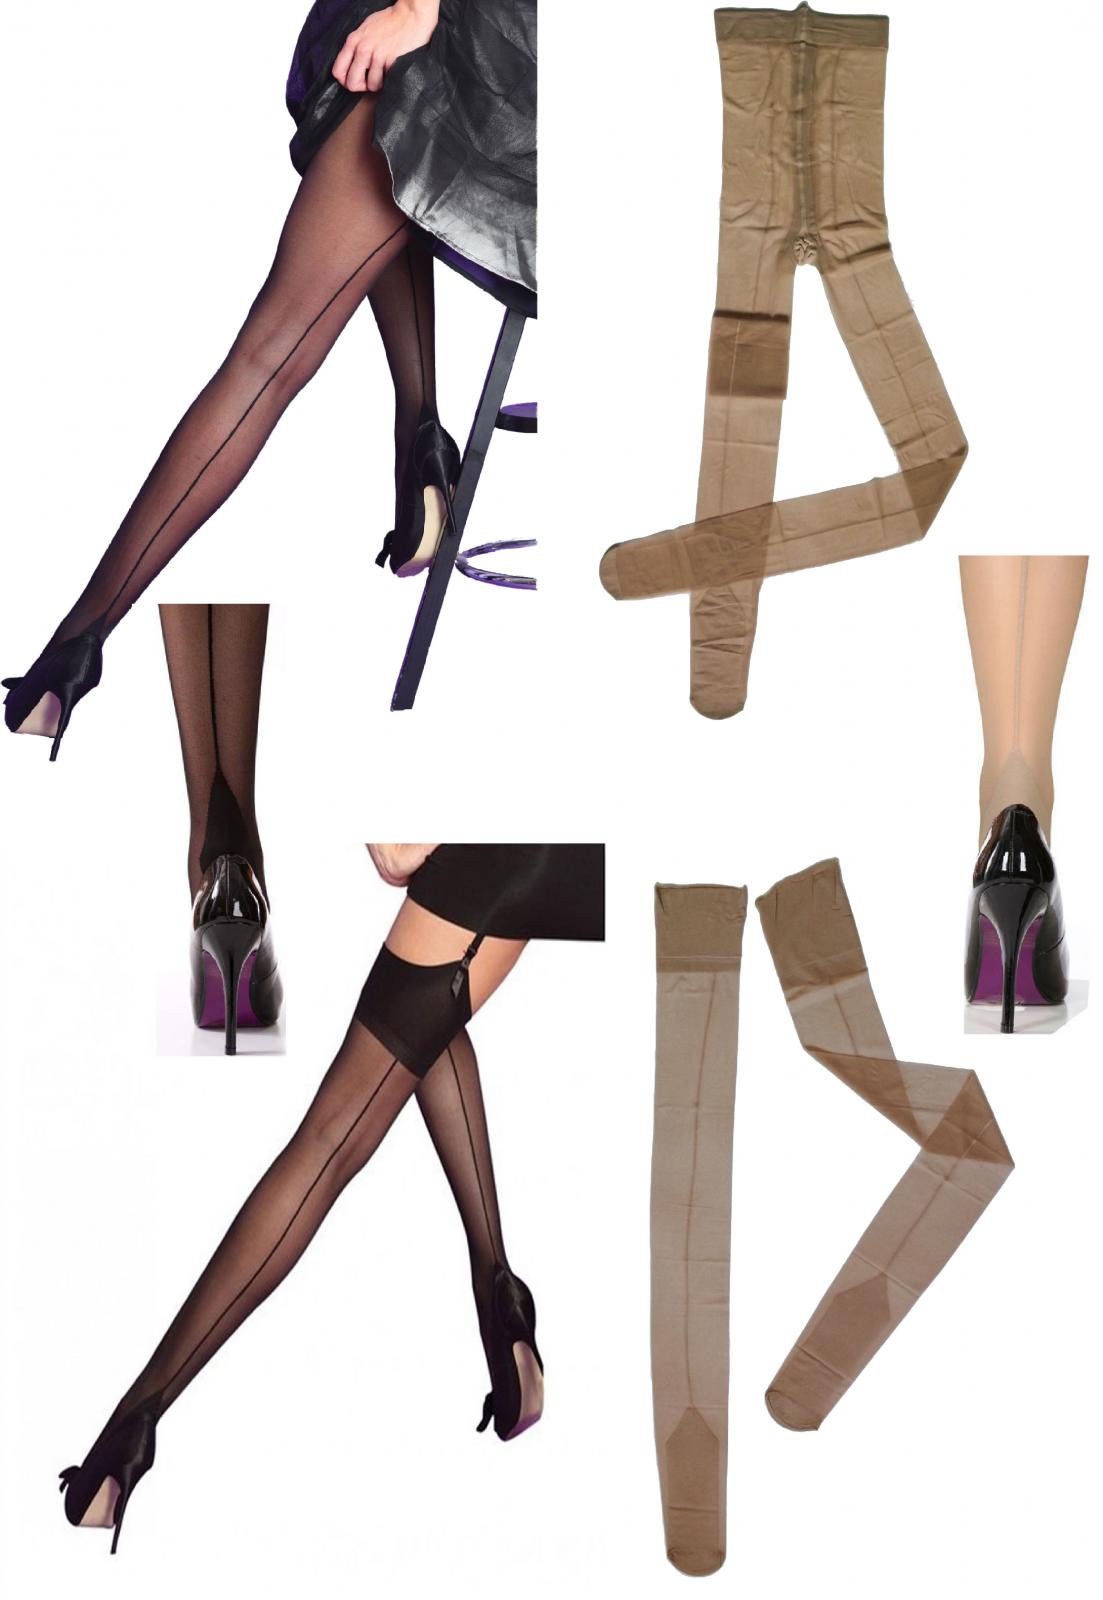 Seamed Seamer Stockings or Tights with Cuban Heel Black or Nude | eBay